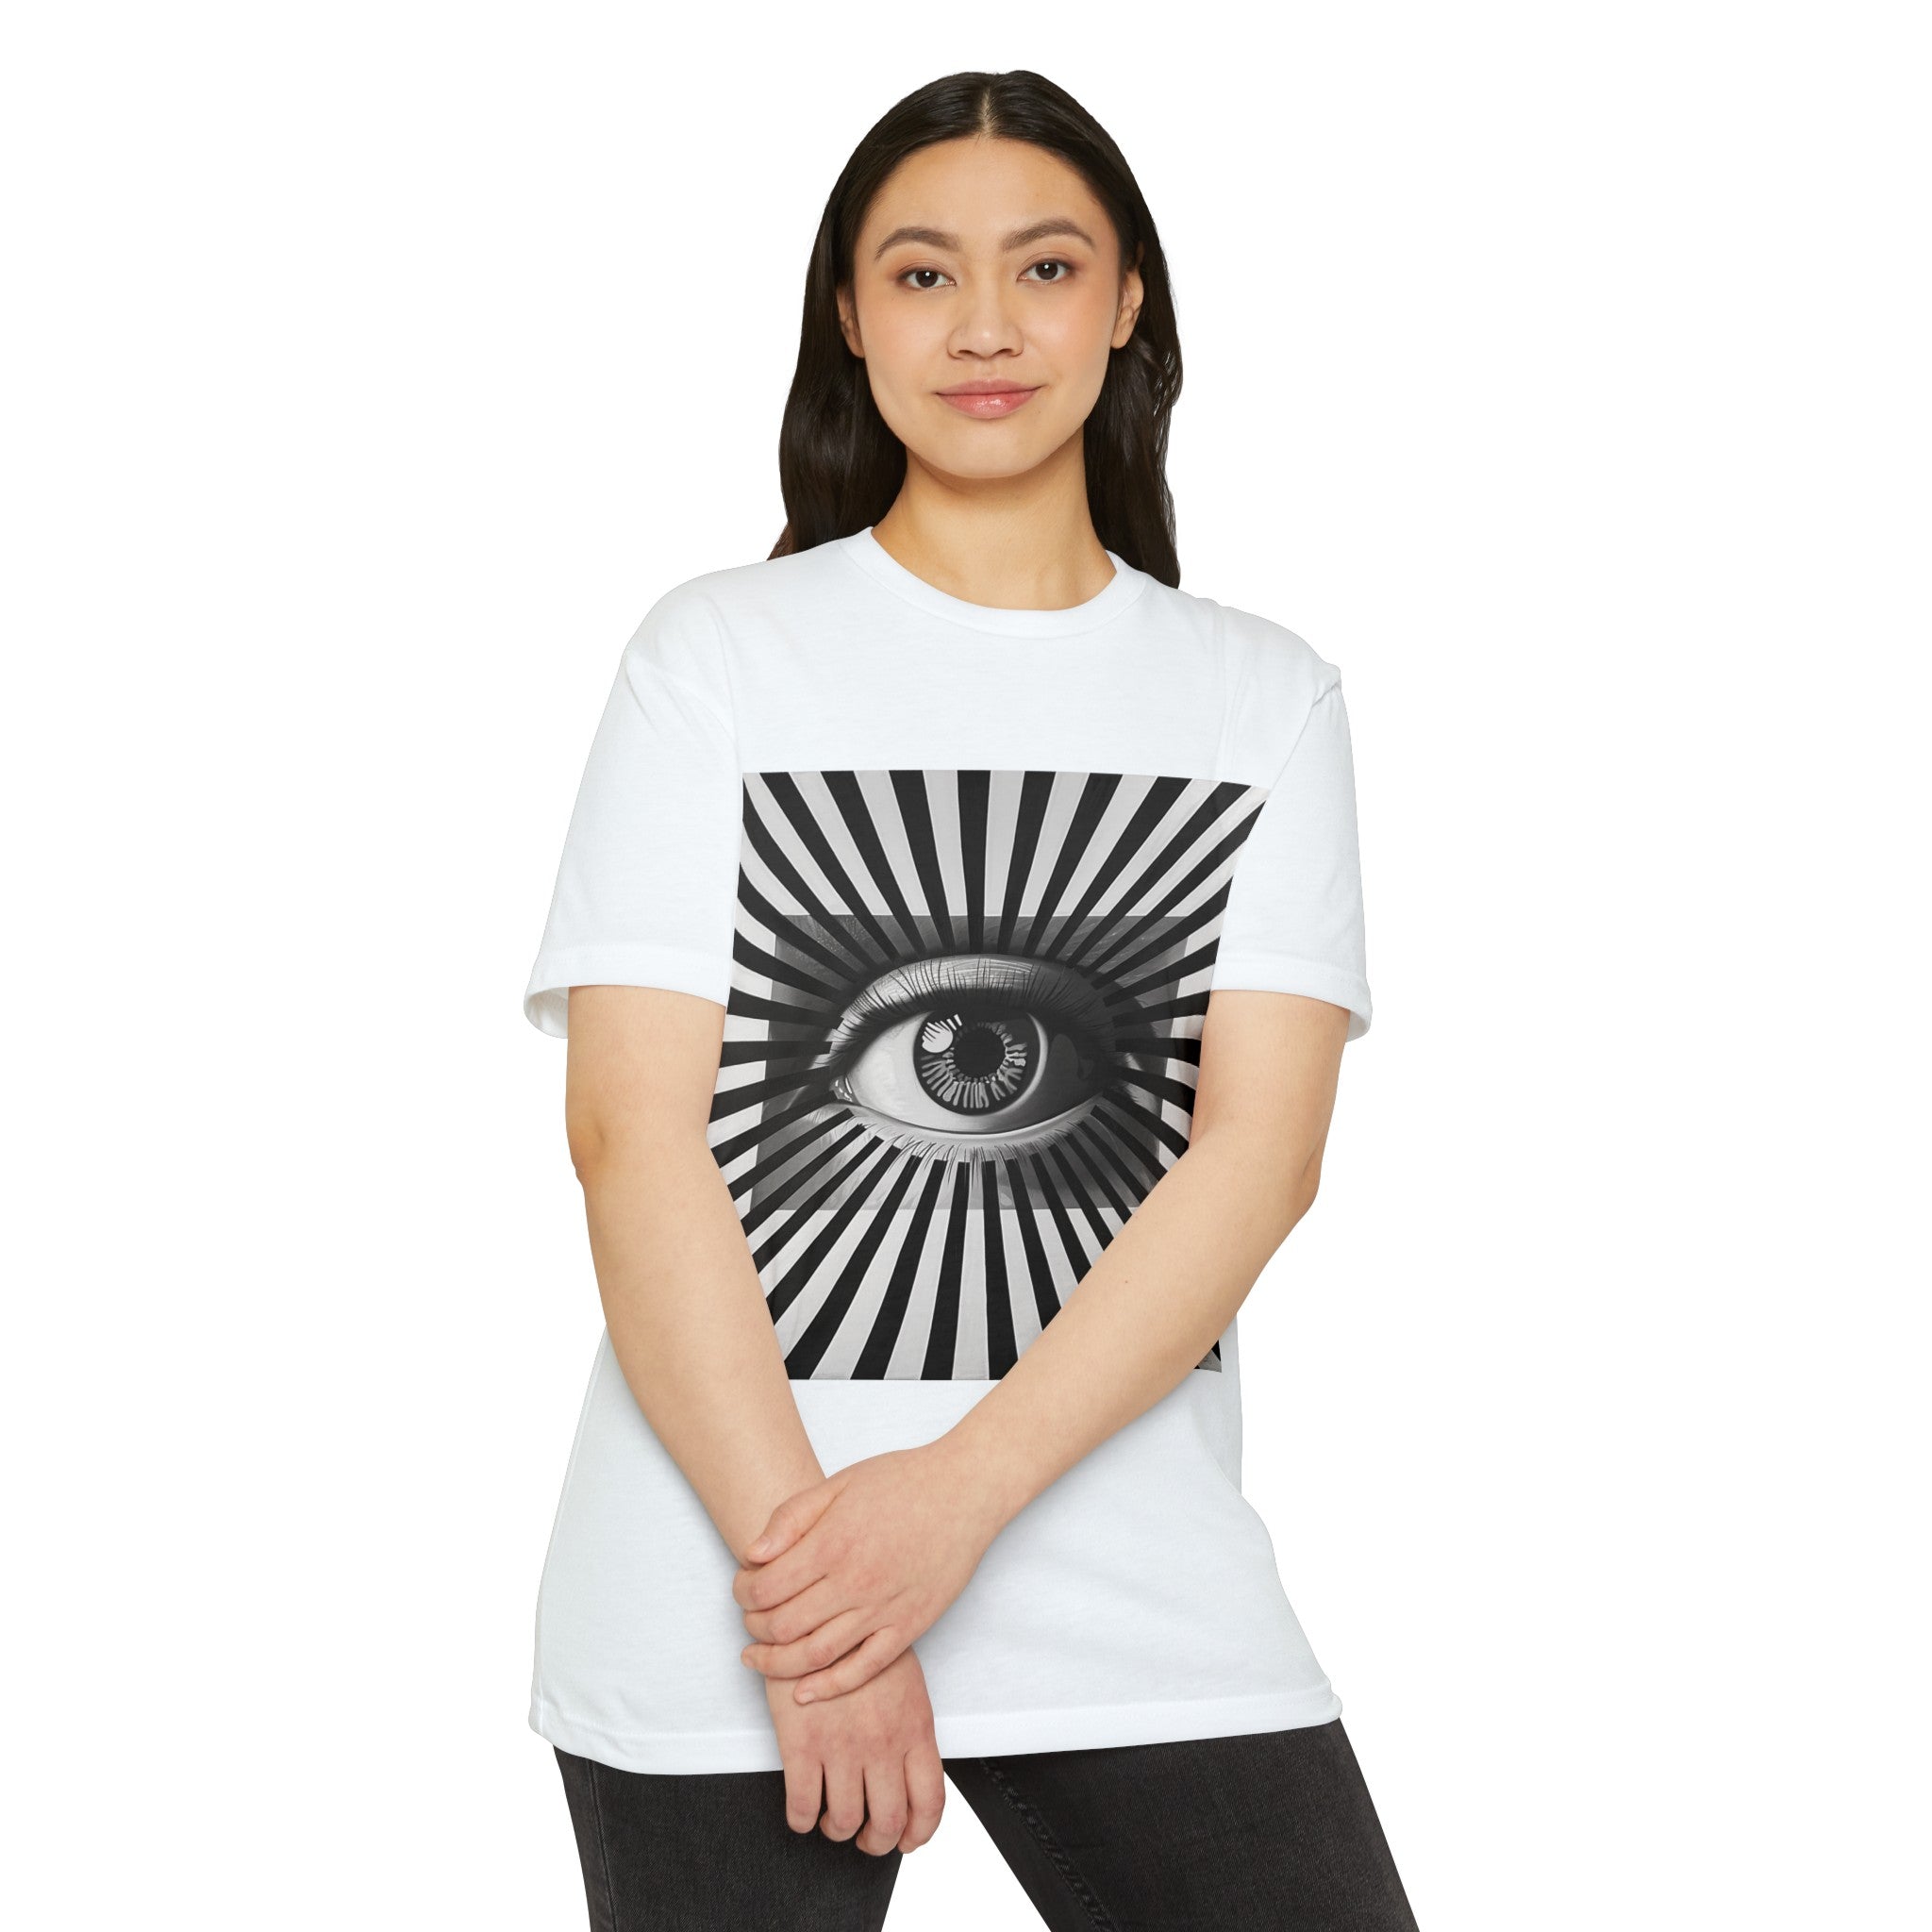 Perception Shift: 'Eye of the Beholder' Optical Illusion Eyeball Unisex CVC Jersey T-Shirt - A Play on Vision and Style